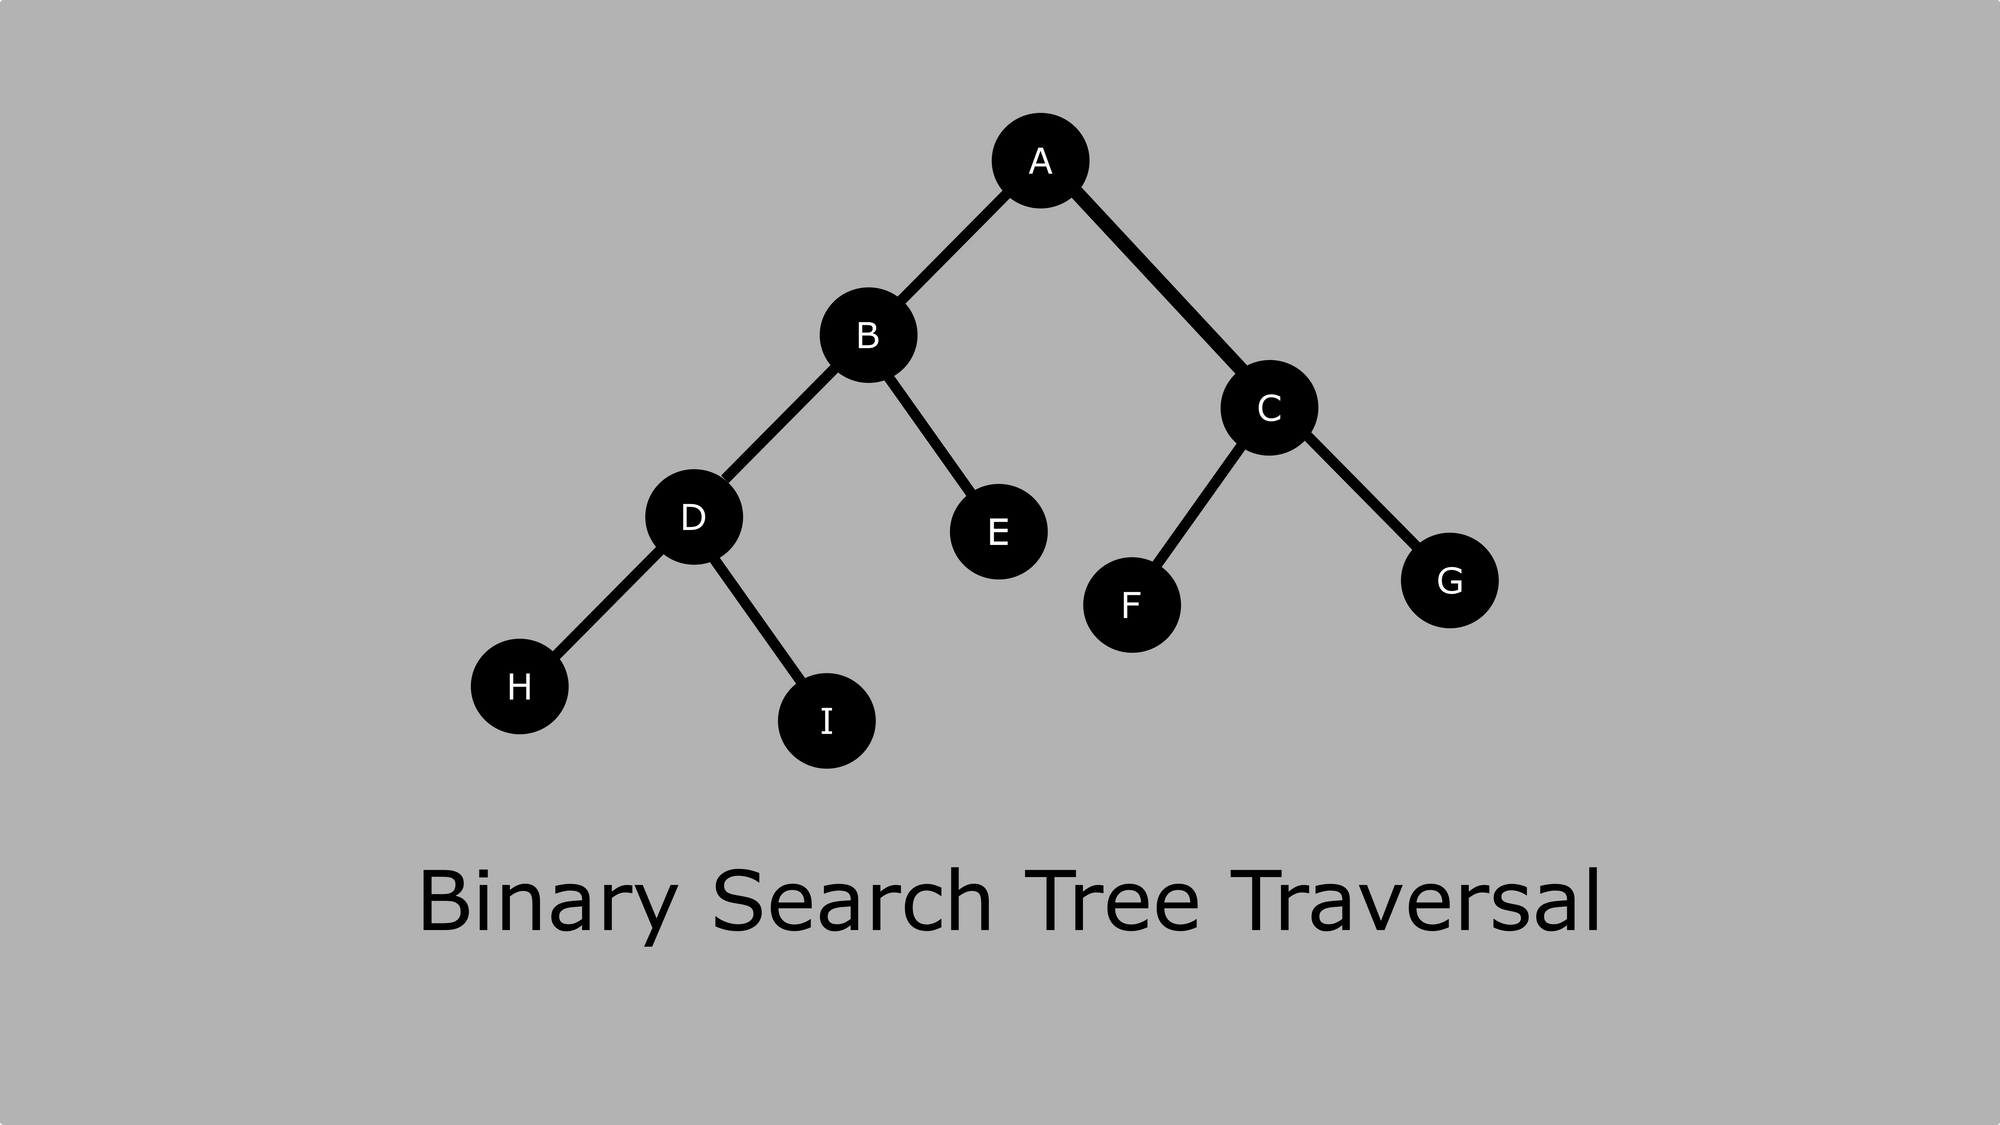 Binary Search Tree Traversal – Inorder, Preorder, Post Order for BST